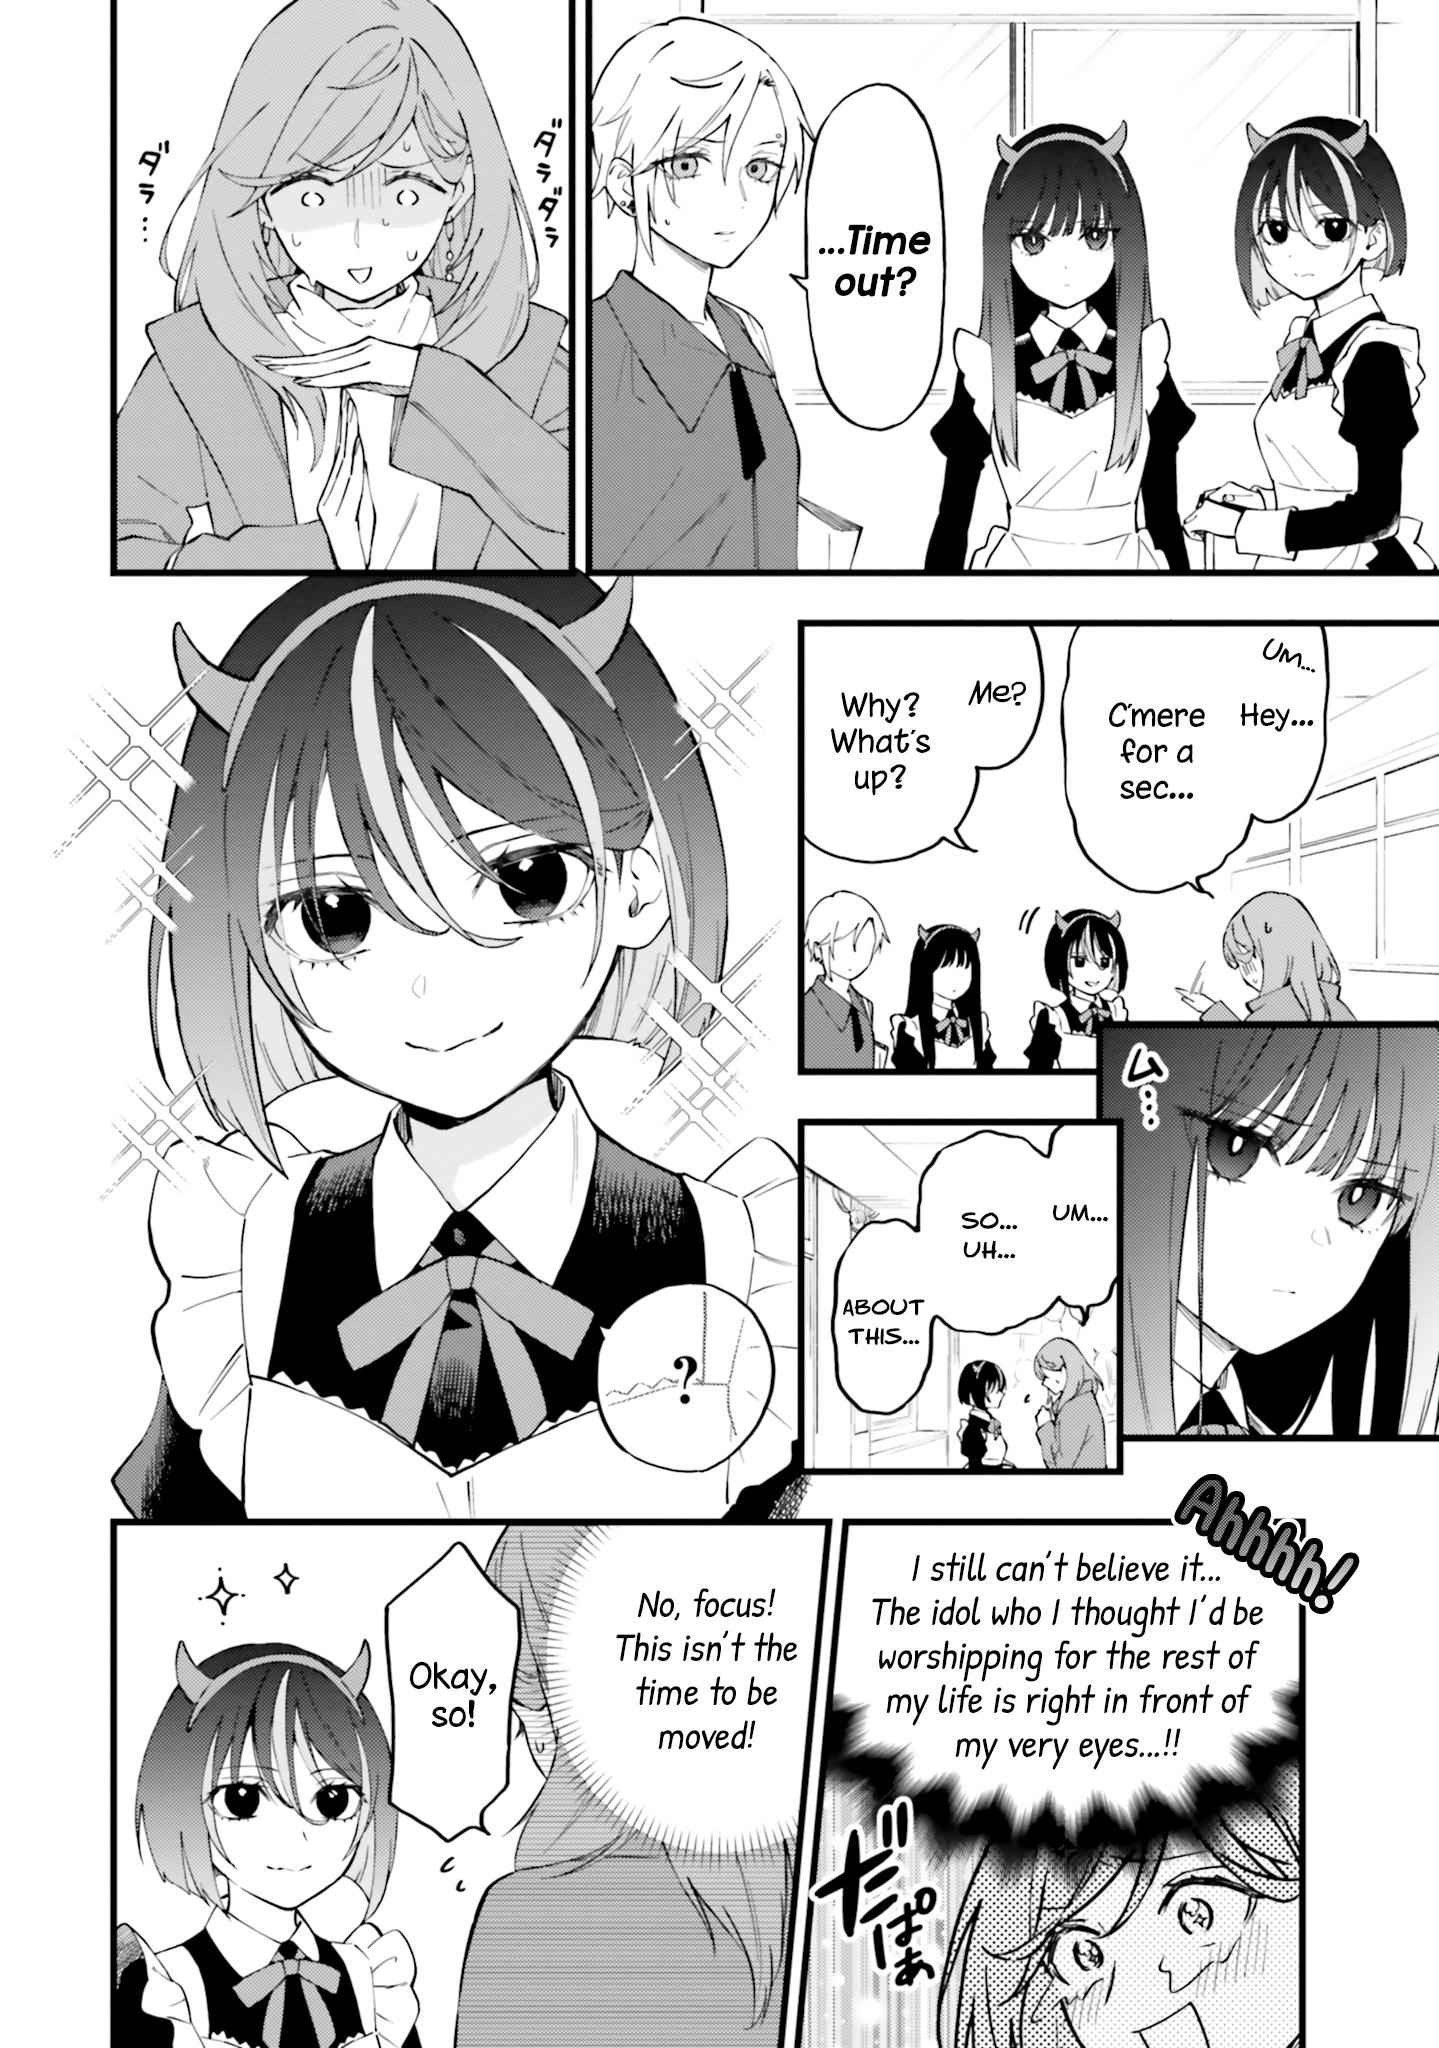 Keiyaku Shimai Vol.2 Chapter 11: An Older Sister Who Puts Her Little Sister First - Picture 2